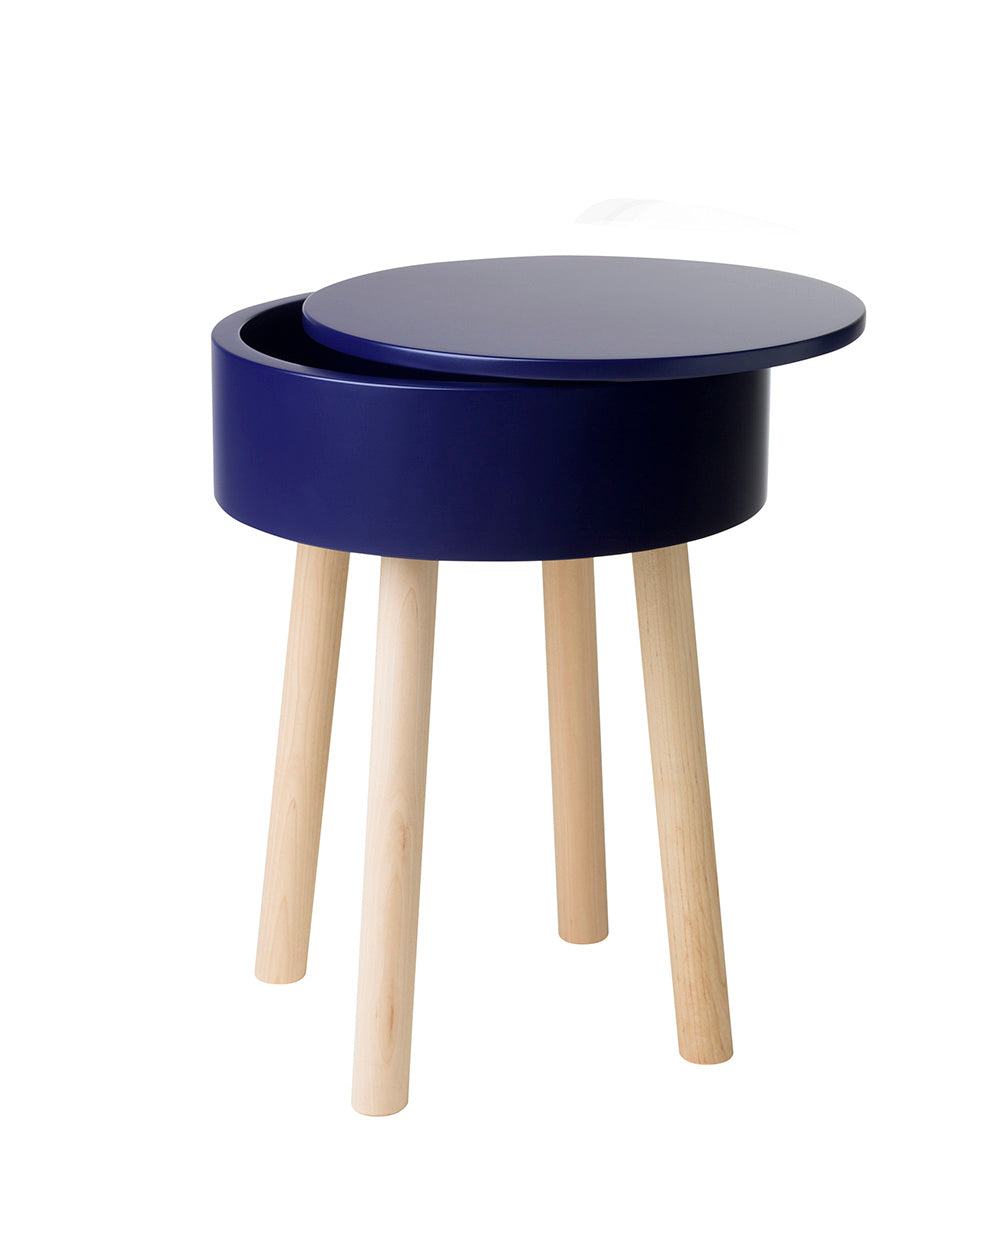 Multifunctional Piilo stool in Ink Blue. Piilo is a stool with storage space hidden inside its seat. Designed by Hanna Lantto. Made in Finland.